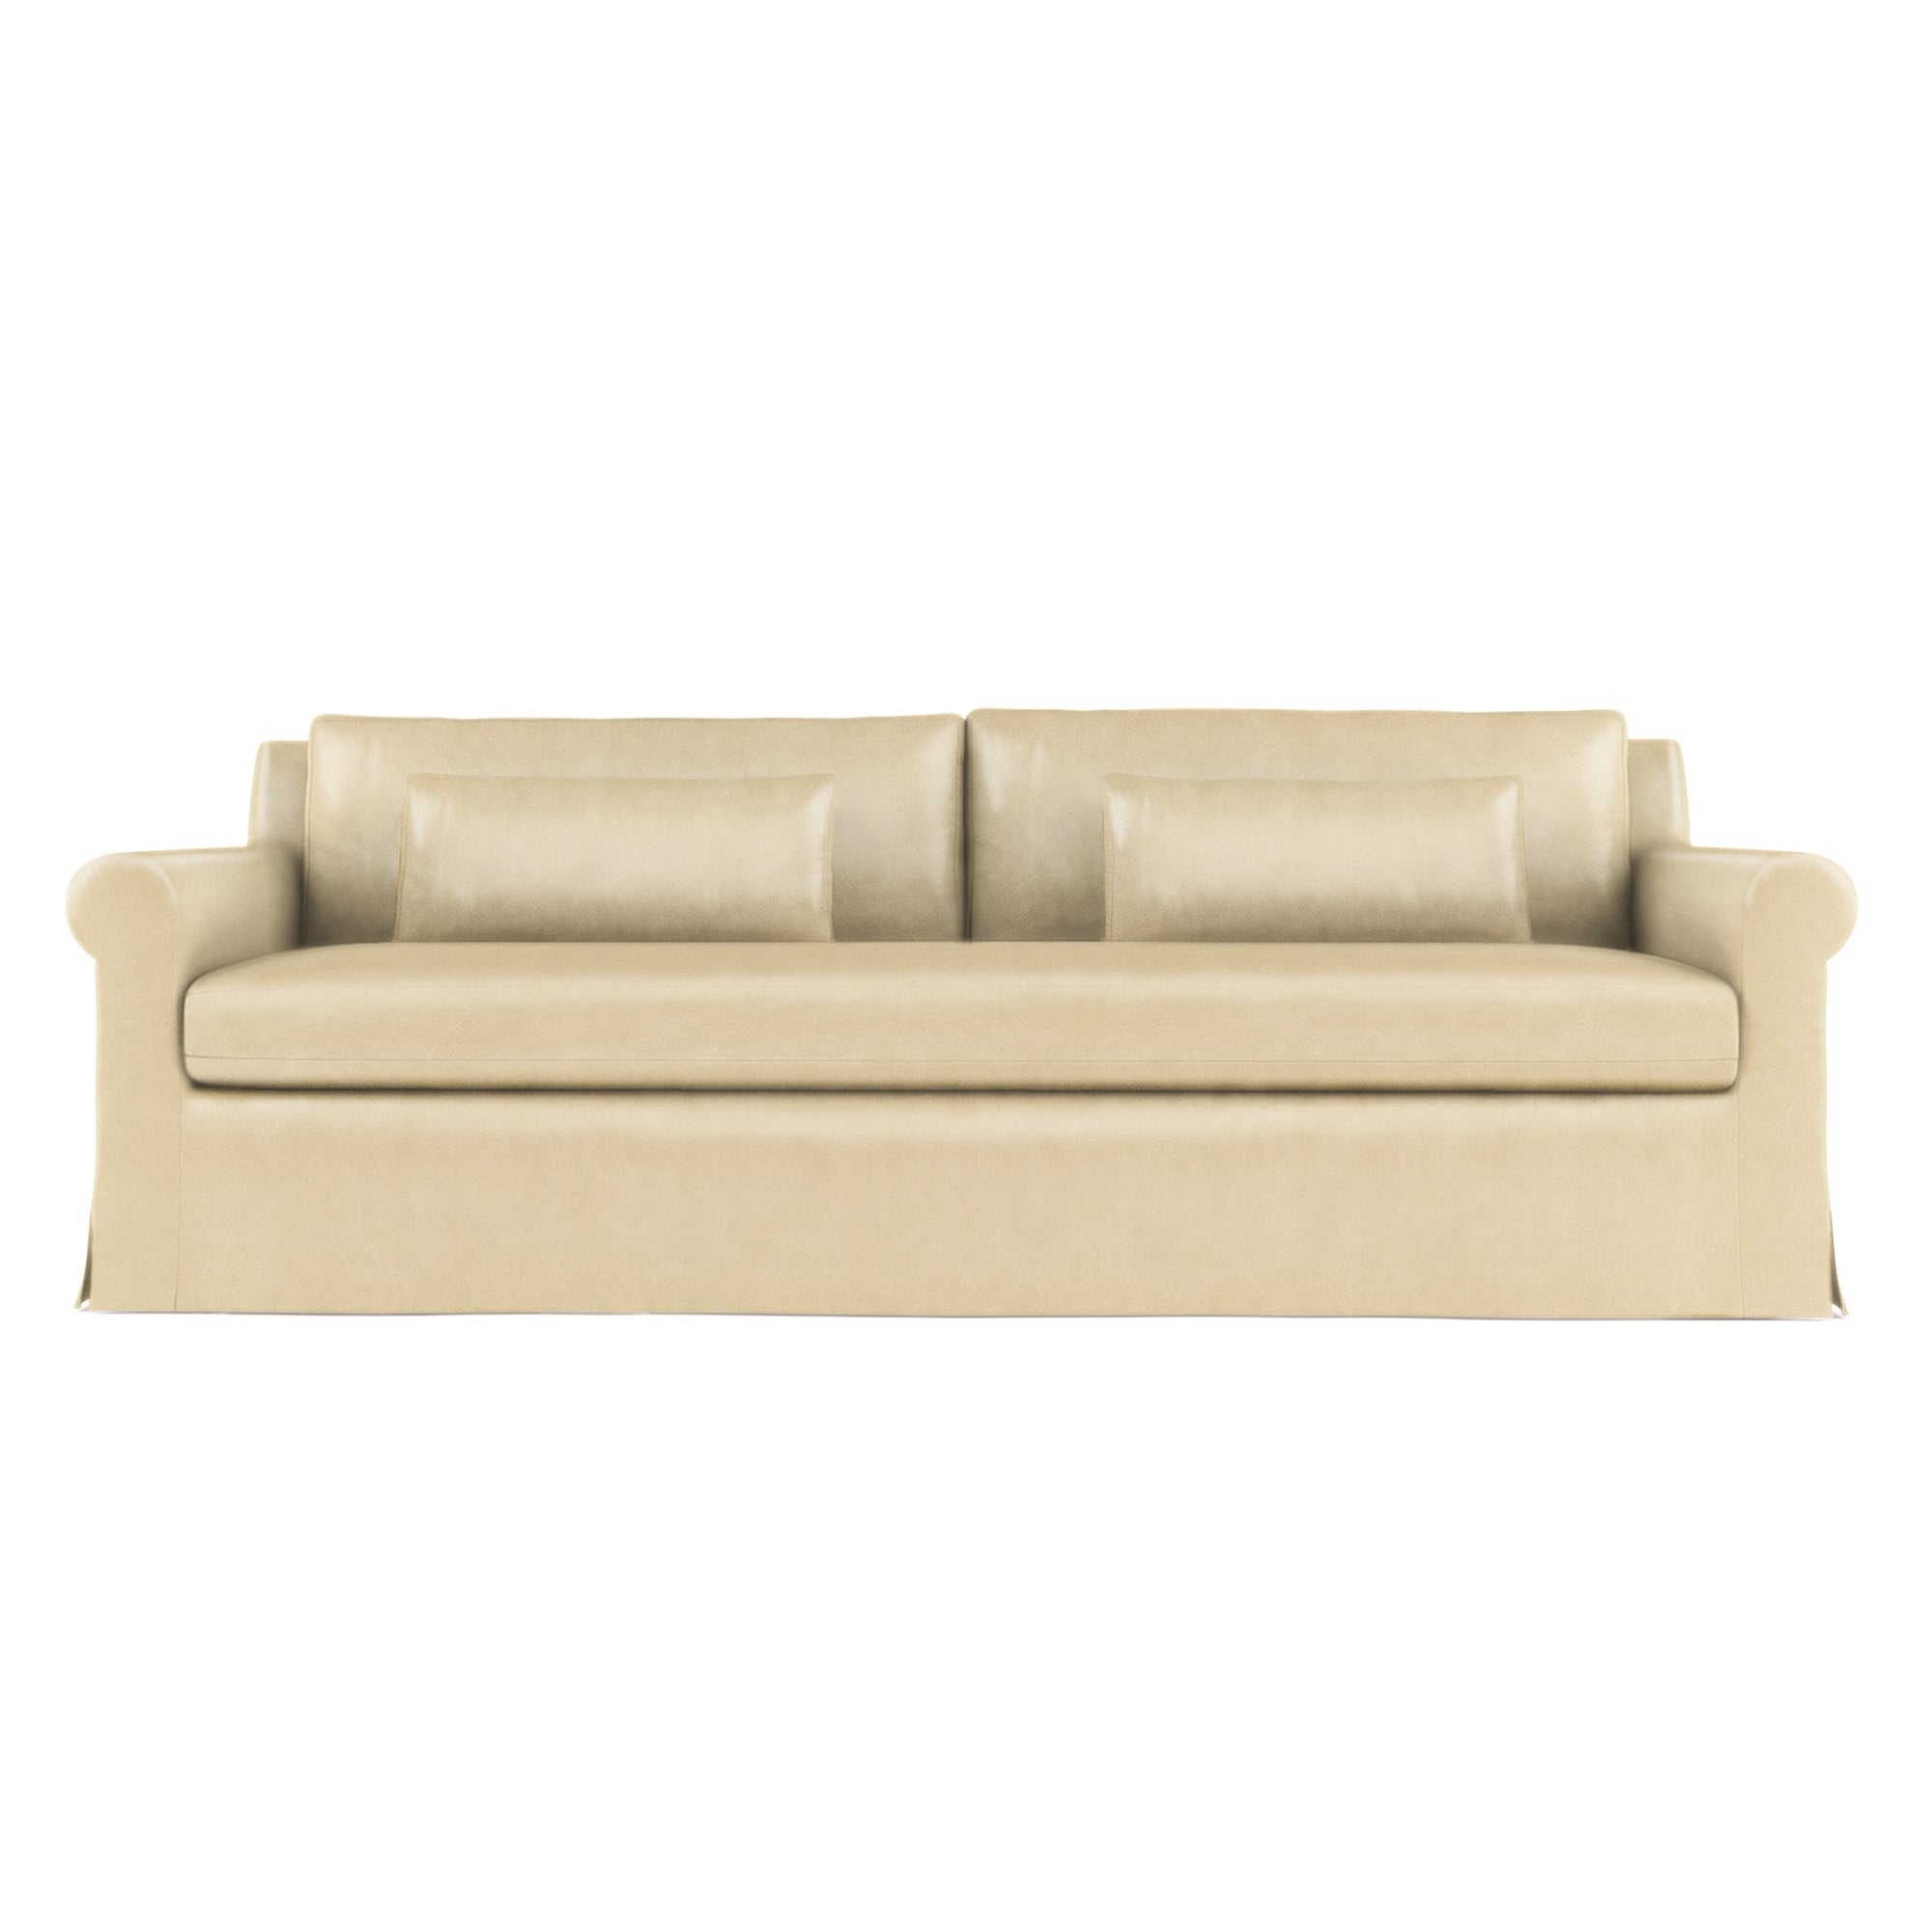 Ludlow Sofa - Oyster Vintage Leather